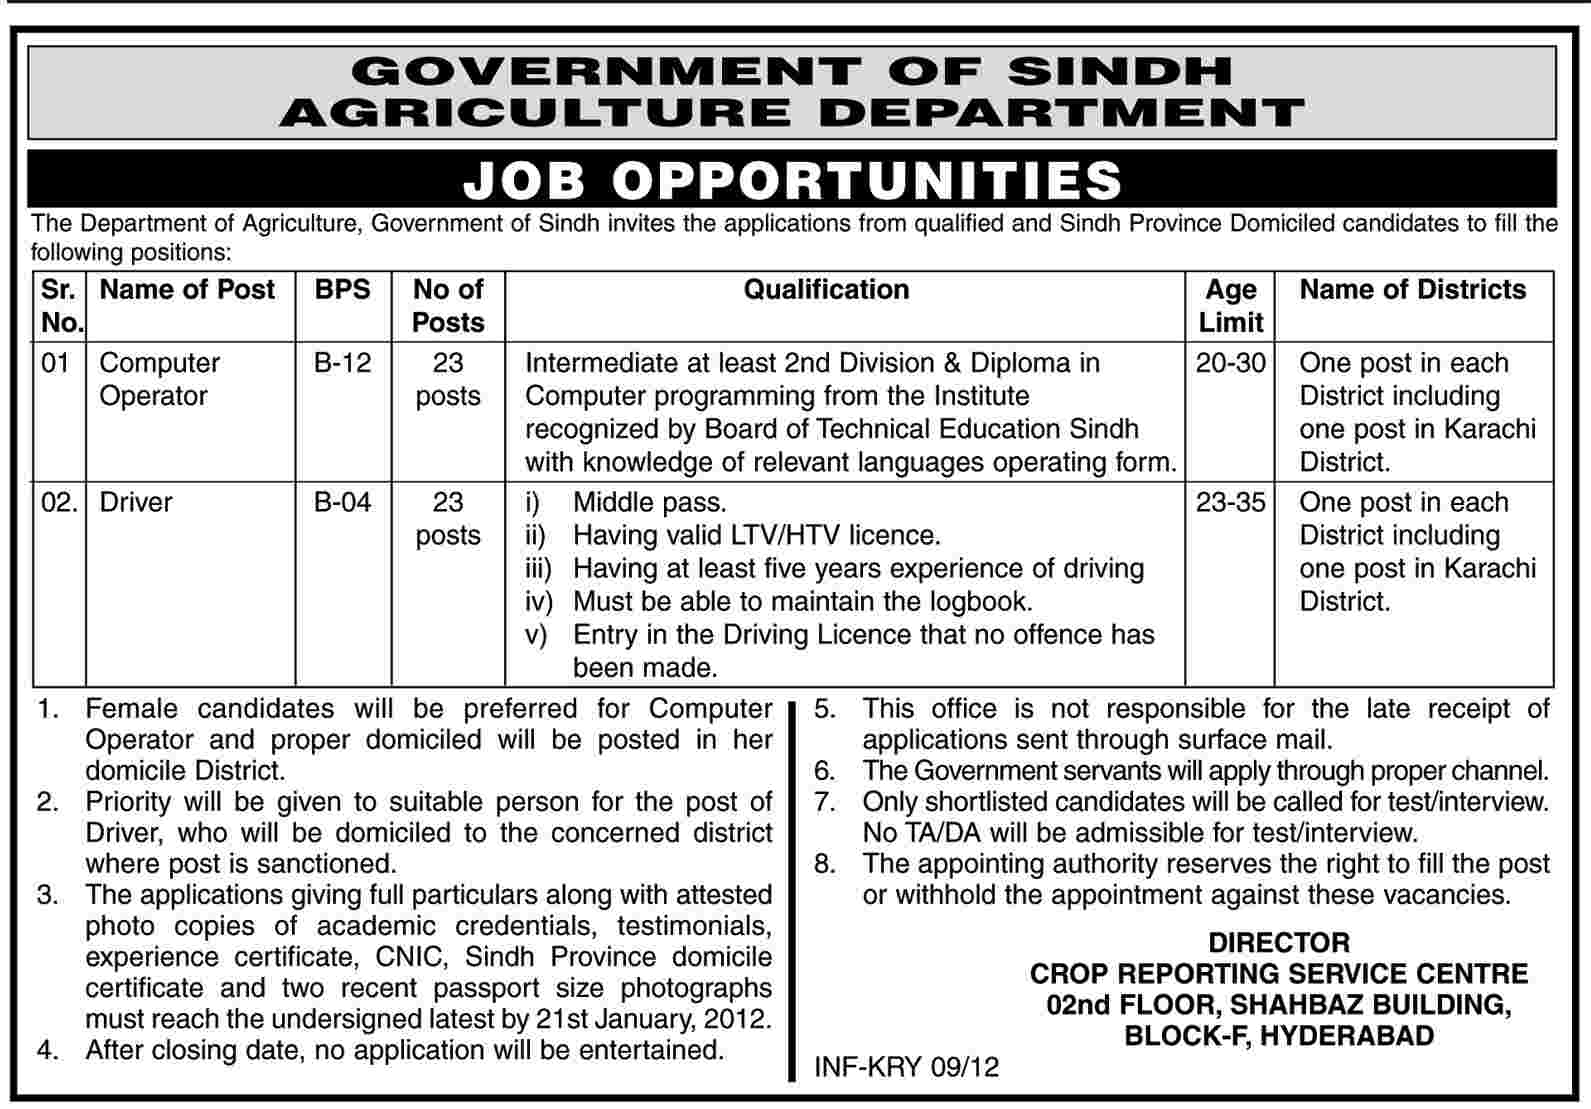 Agricultural Department Karachi, Government of Sindh Required Computer Operators and Drivers